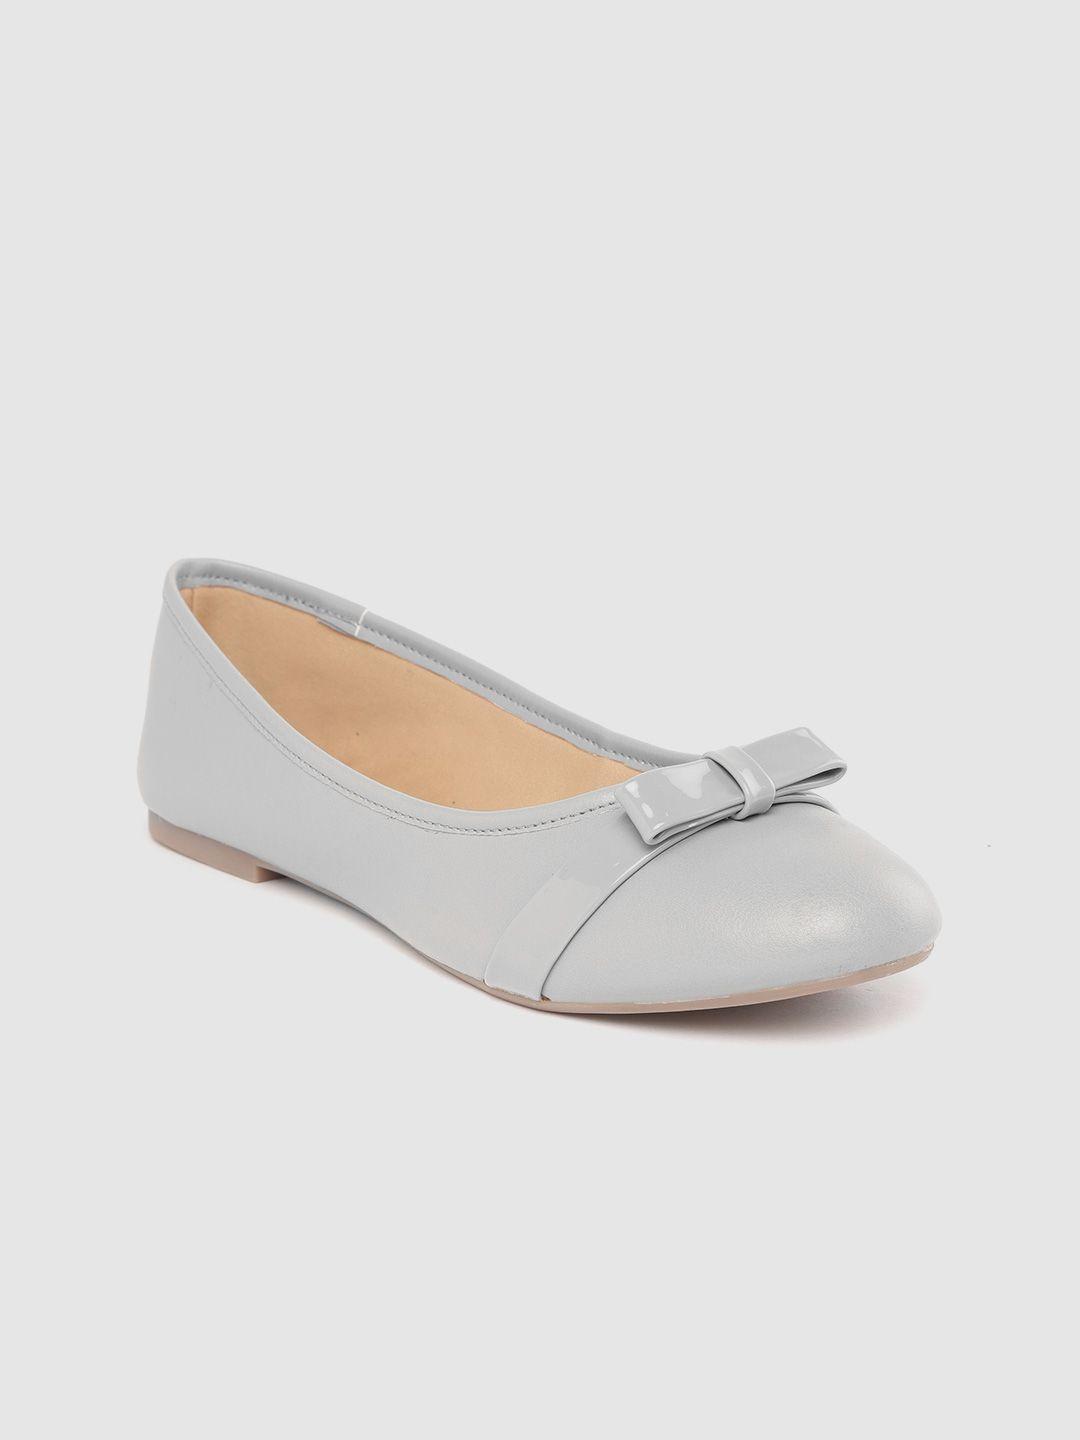 Carlton London Women Grey Solid Ballerinas with Bow Detail